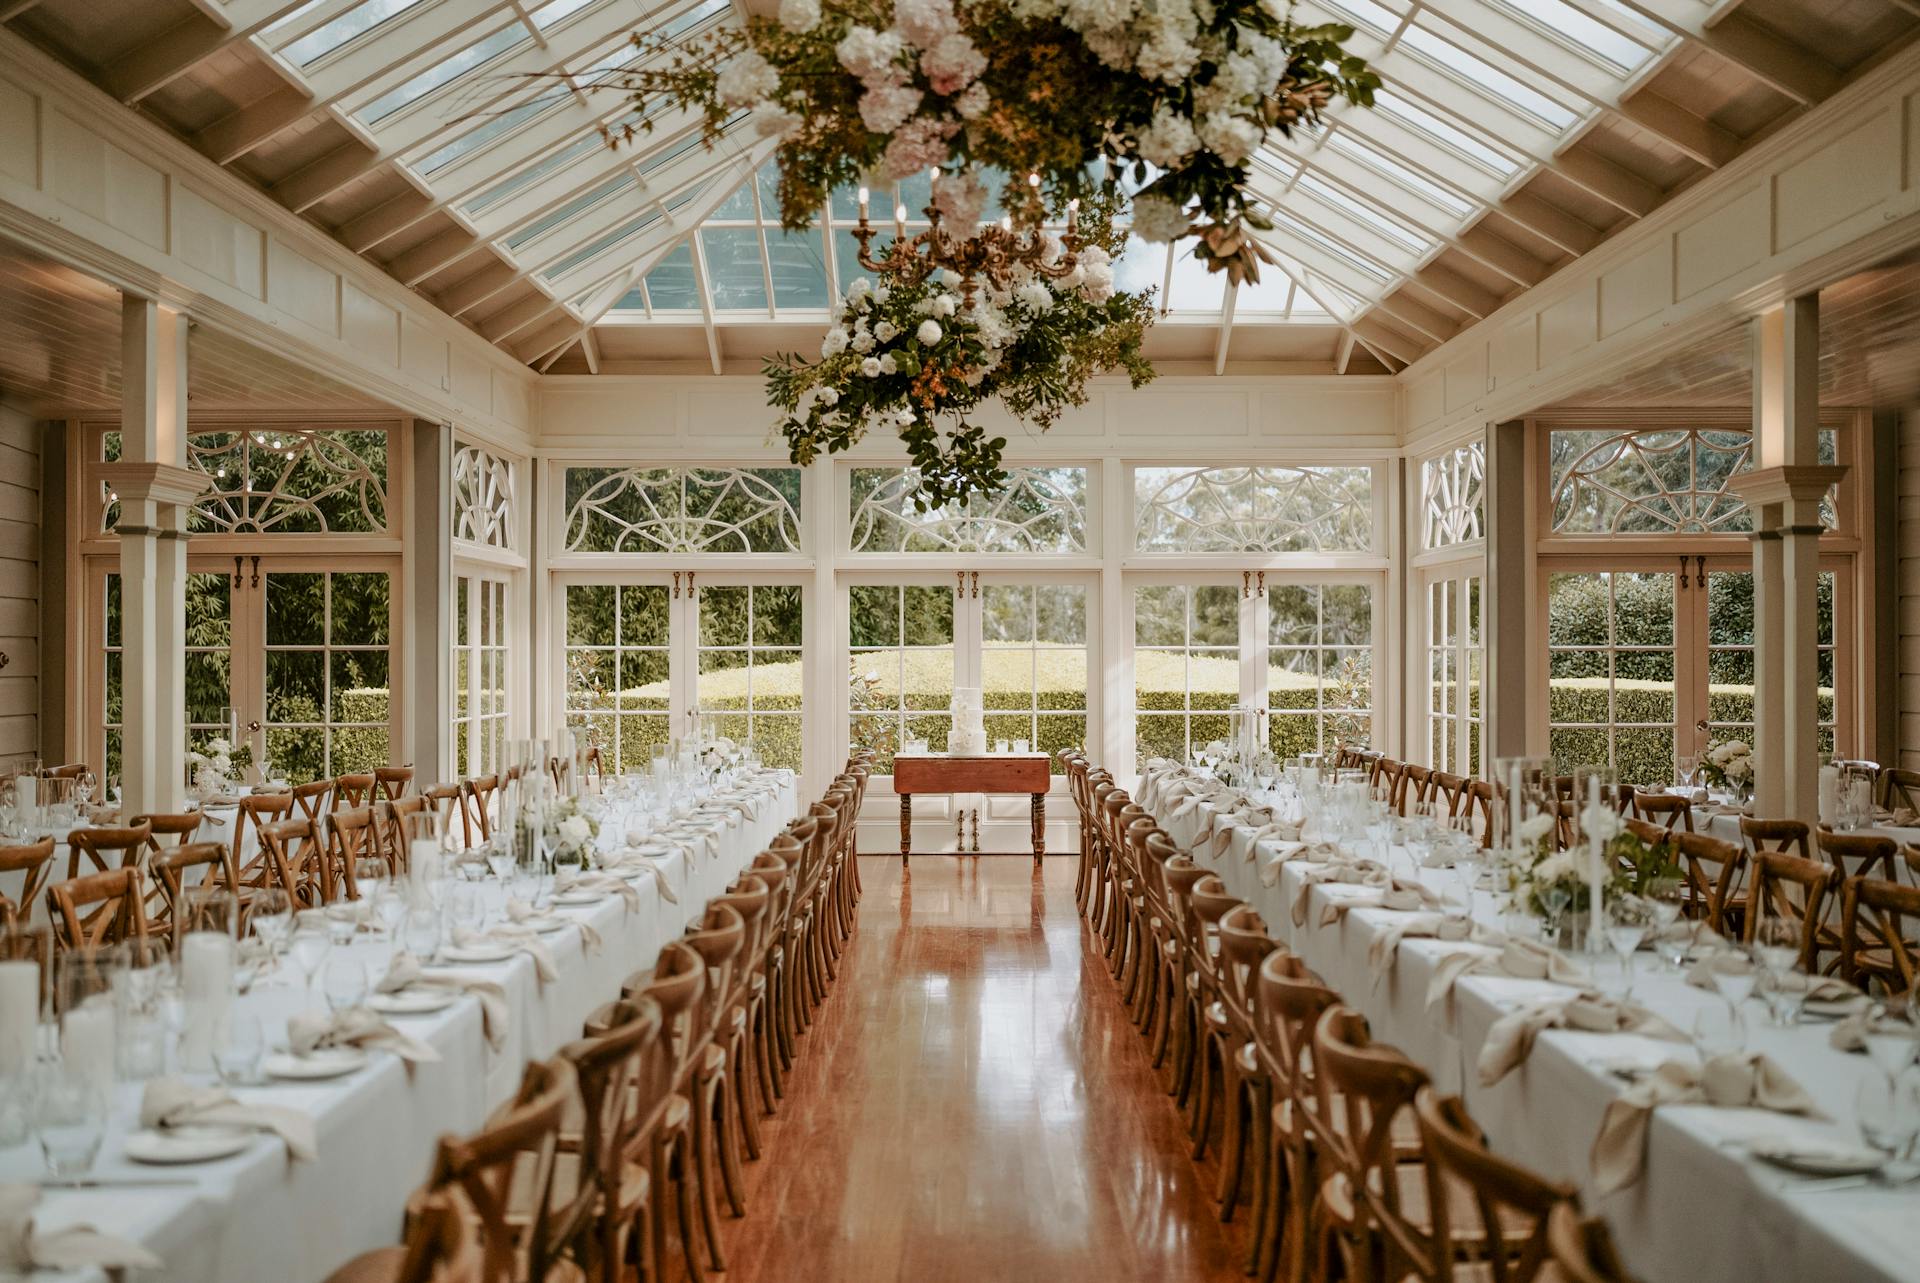 A beautifully decorated event space with a glass ceiling and large windows, featuring two long banquet tables set with white linens, glasses, and floral centerpieces. Wooden cross-back chairs line the tables, and a chandelier adorned with flowers hangs from above.